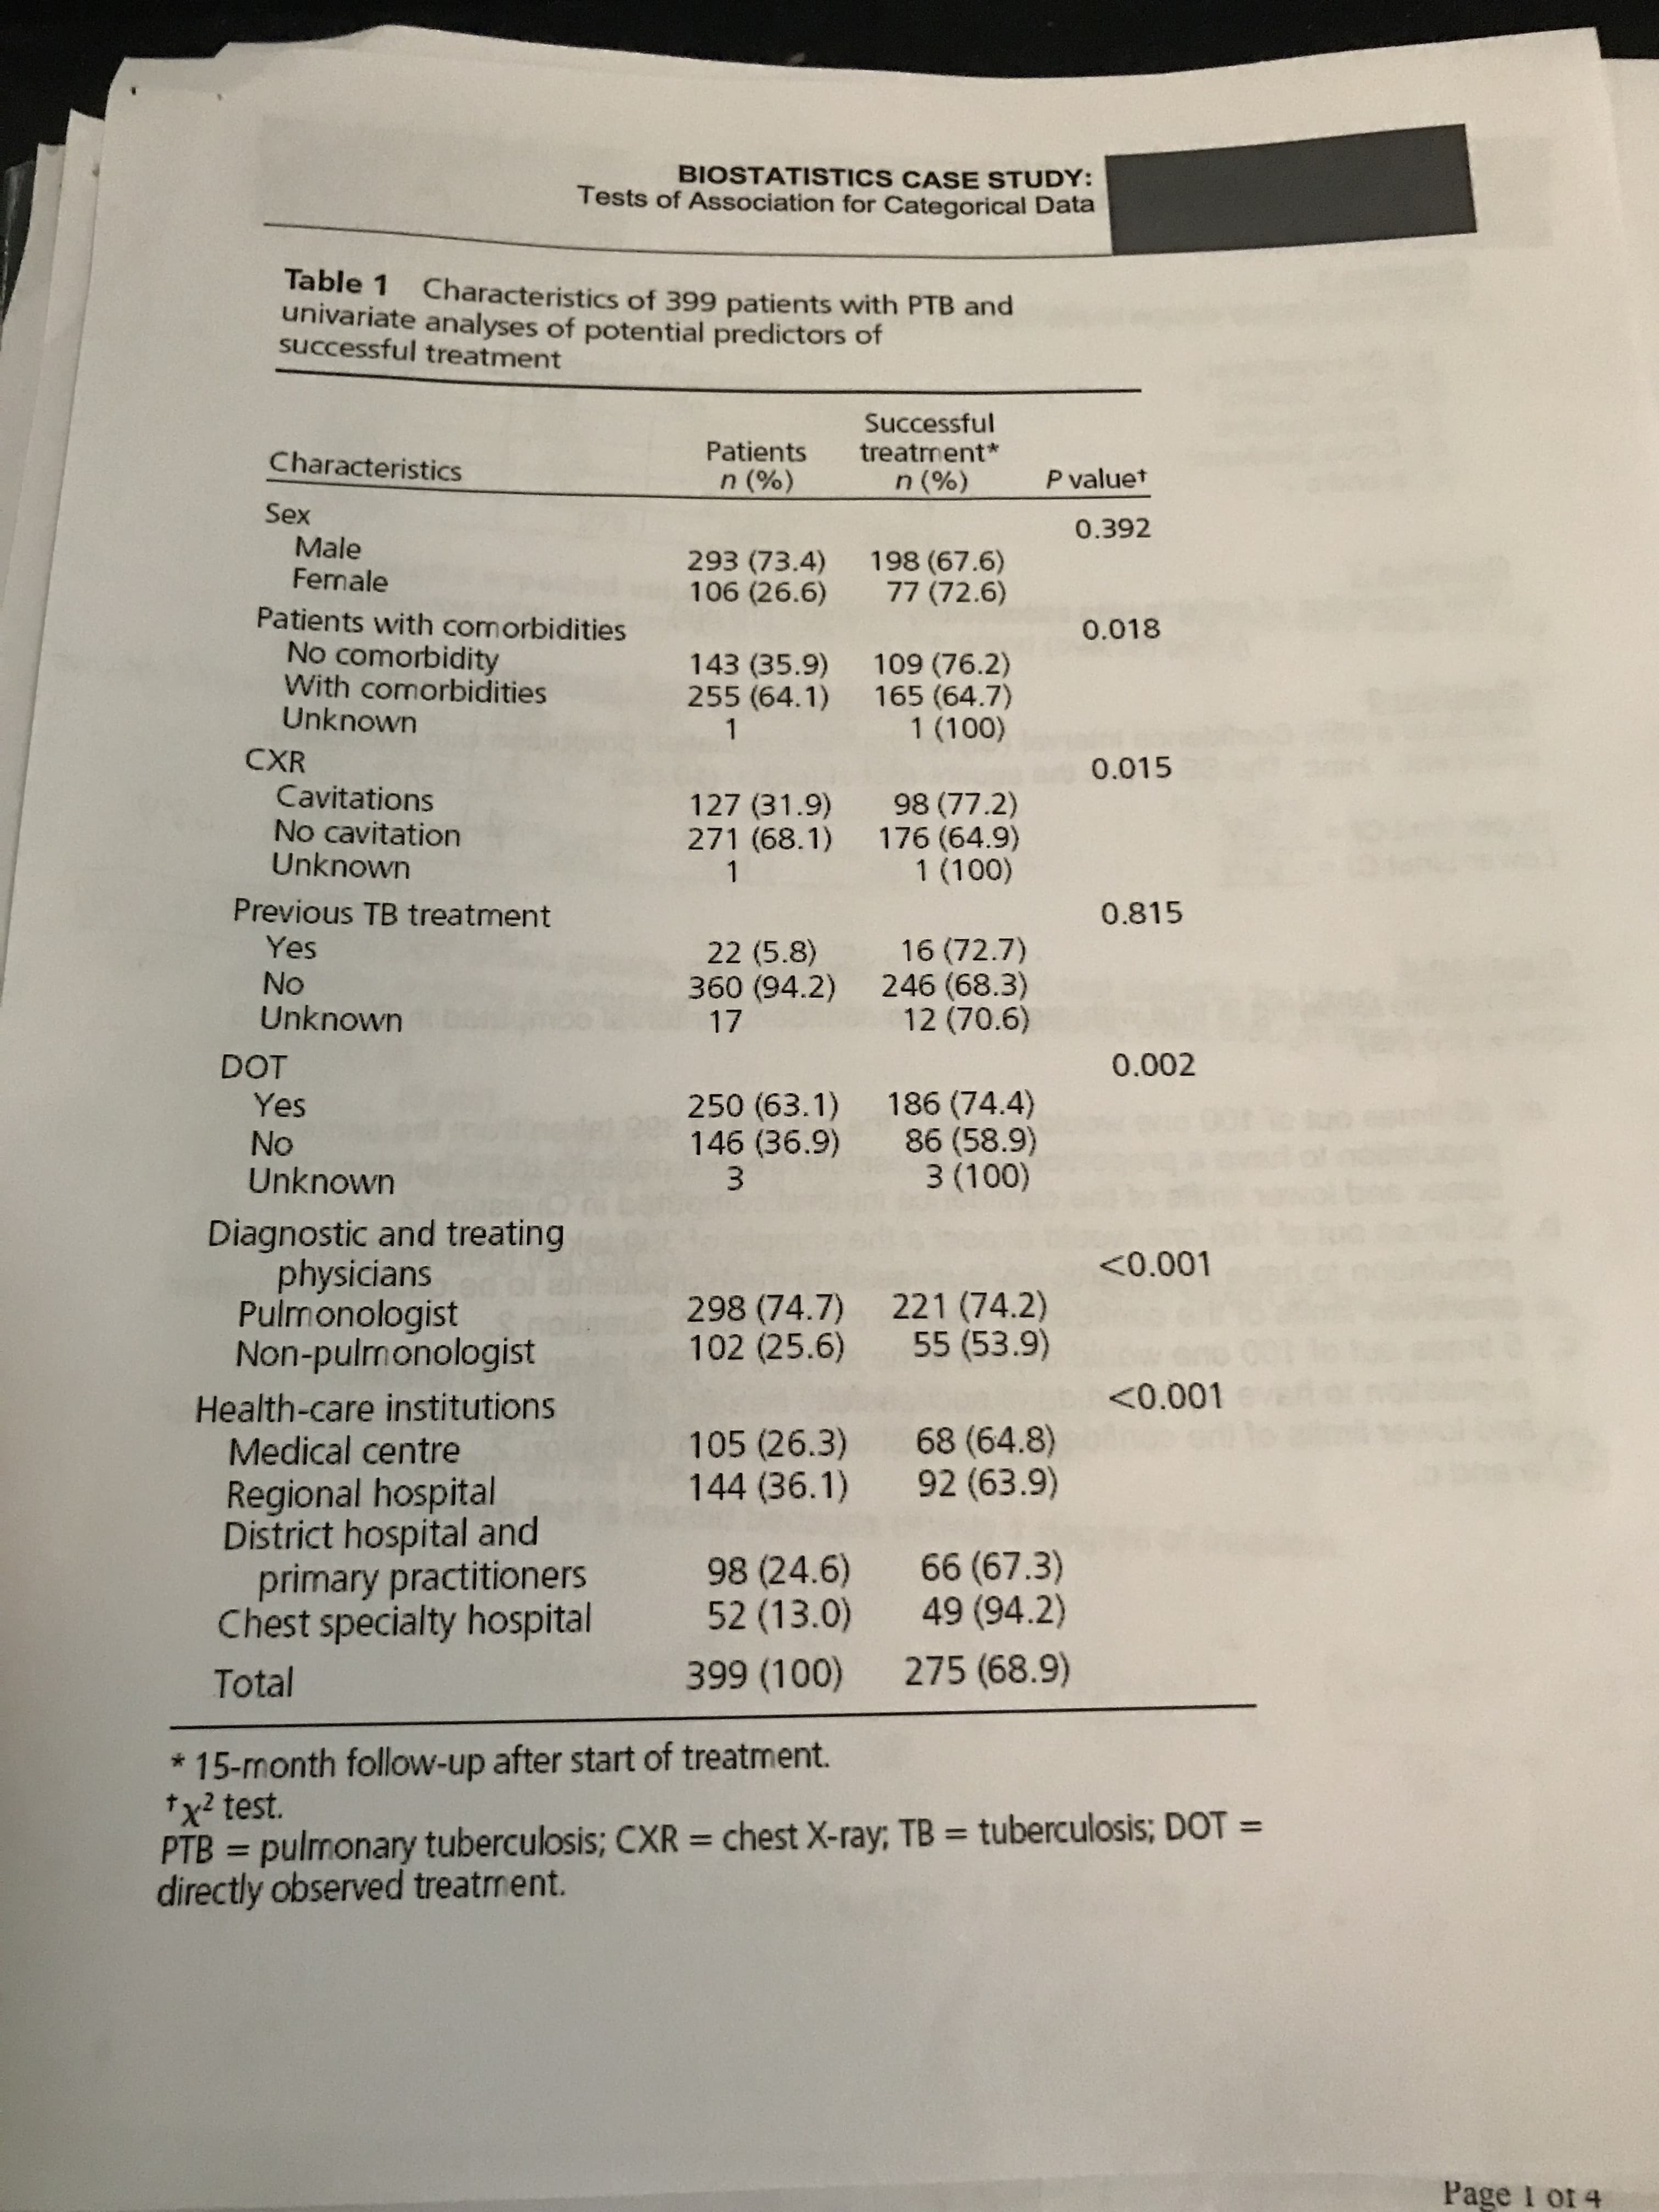 BIOSTATISTICS CASE STUDY:
Tests of Association for Categorical Data
Table 1 Characteristics of 399 patients with PTB and
univariate analyses of potential predictors of
successful treatment
Successful
Characteristics
Patients treatment
n (%)
n(96)
Pvalue*
Sex
0.392
Male
293 (73.4)
106 (26.6)
198 (67.6)
77 (72.6)
Female
Patients with comorbidities
0.018
No comorbidity
With comorbidities
Unknown
143 (35.9)
255 (64.1)
109 (76.2)
165 (64.7)
1 (100)
CXR
0.015
Cavitations
No cavitation
Unknown
127 (31.9)
271 (68.1)
98 (77.2)
176 (64.9)
1 (100)
Previous TB treatment
0.815
Yes
No
Unknown
22 (5.8) 16 (72.7)
360 (94.2) 246 (68.3)
12 (70.6)
17
DOT
0.002
Yes
No
Unknown
250 (63.1) 186 (74.4
3 (100)
146 (36.9)
86 (58.9)
Diagnostic and treating
physicians
<0.001
298 (74.7)
221 (74.2)
Pulmonologist
Non-pulmonologist
102 (25.6)
55 (53.9)
Health-care institutions
<0.001
105 (26.3)
68 (64.8)
Medical centre
Regional hospital
District hospital and
144 (36.1)
98 (24.6)
399 (100)
*15-month follow-up after start of treatment.
92 (63.9)
66 (67.3)
Chest specialty hospital52 (13.0) 49 (94.2)
primary practitioners
Total
275 (68.9)
tx2 test.
PTB pulmonary tuberculosis; CXR chest X-ray, TB tuberculosis; DOT-
directly observed treatment.
Page i ot 4
